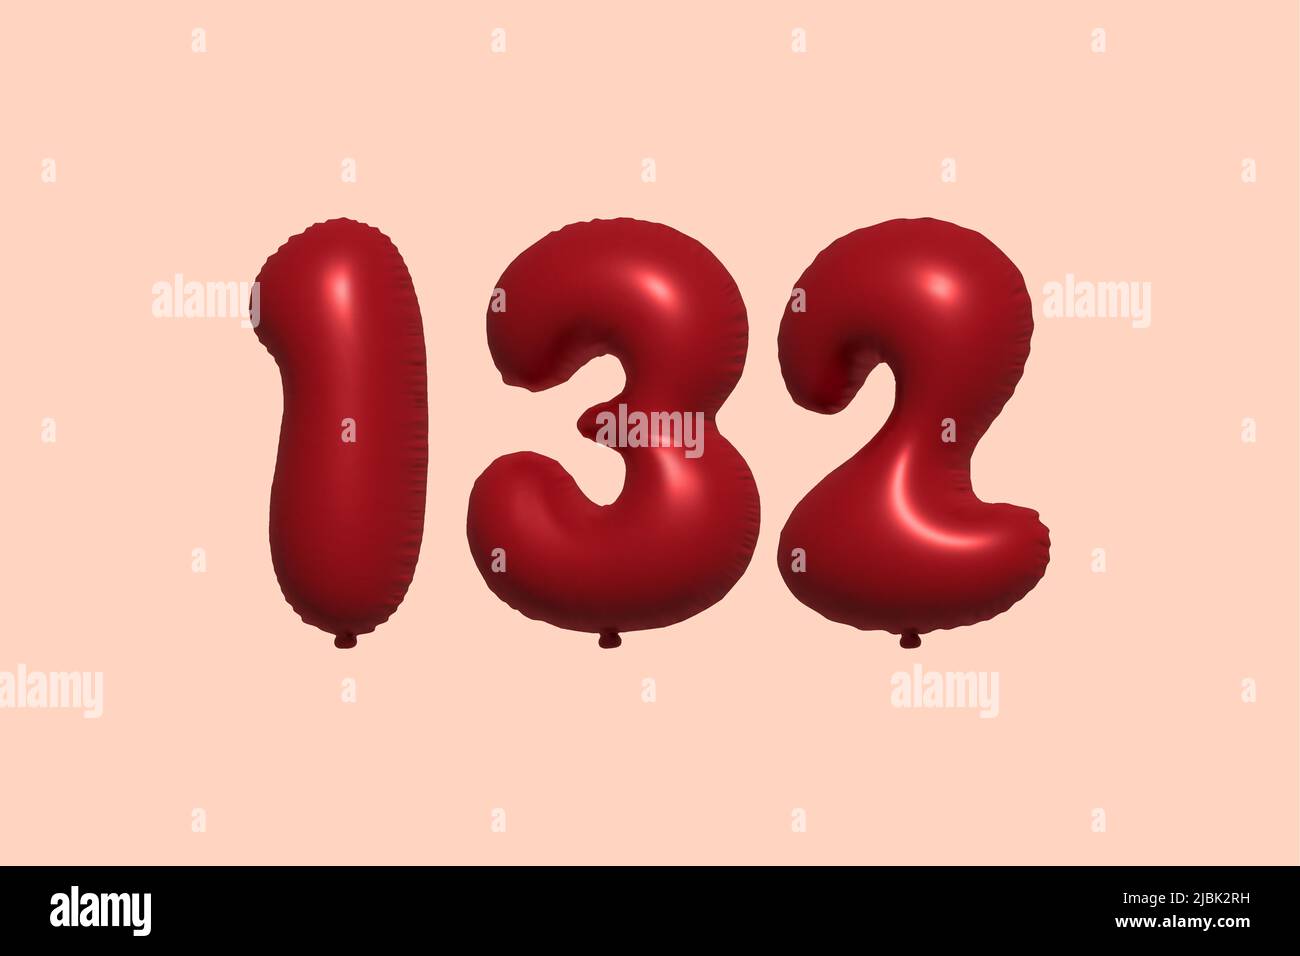 244 All Rounder Images, Stock Photos, 3D objects, & Vectors